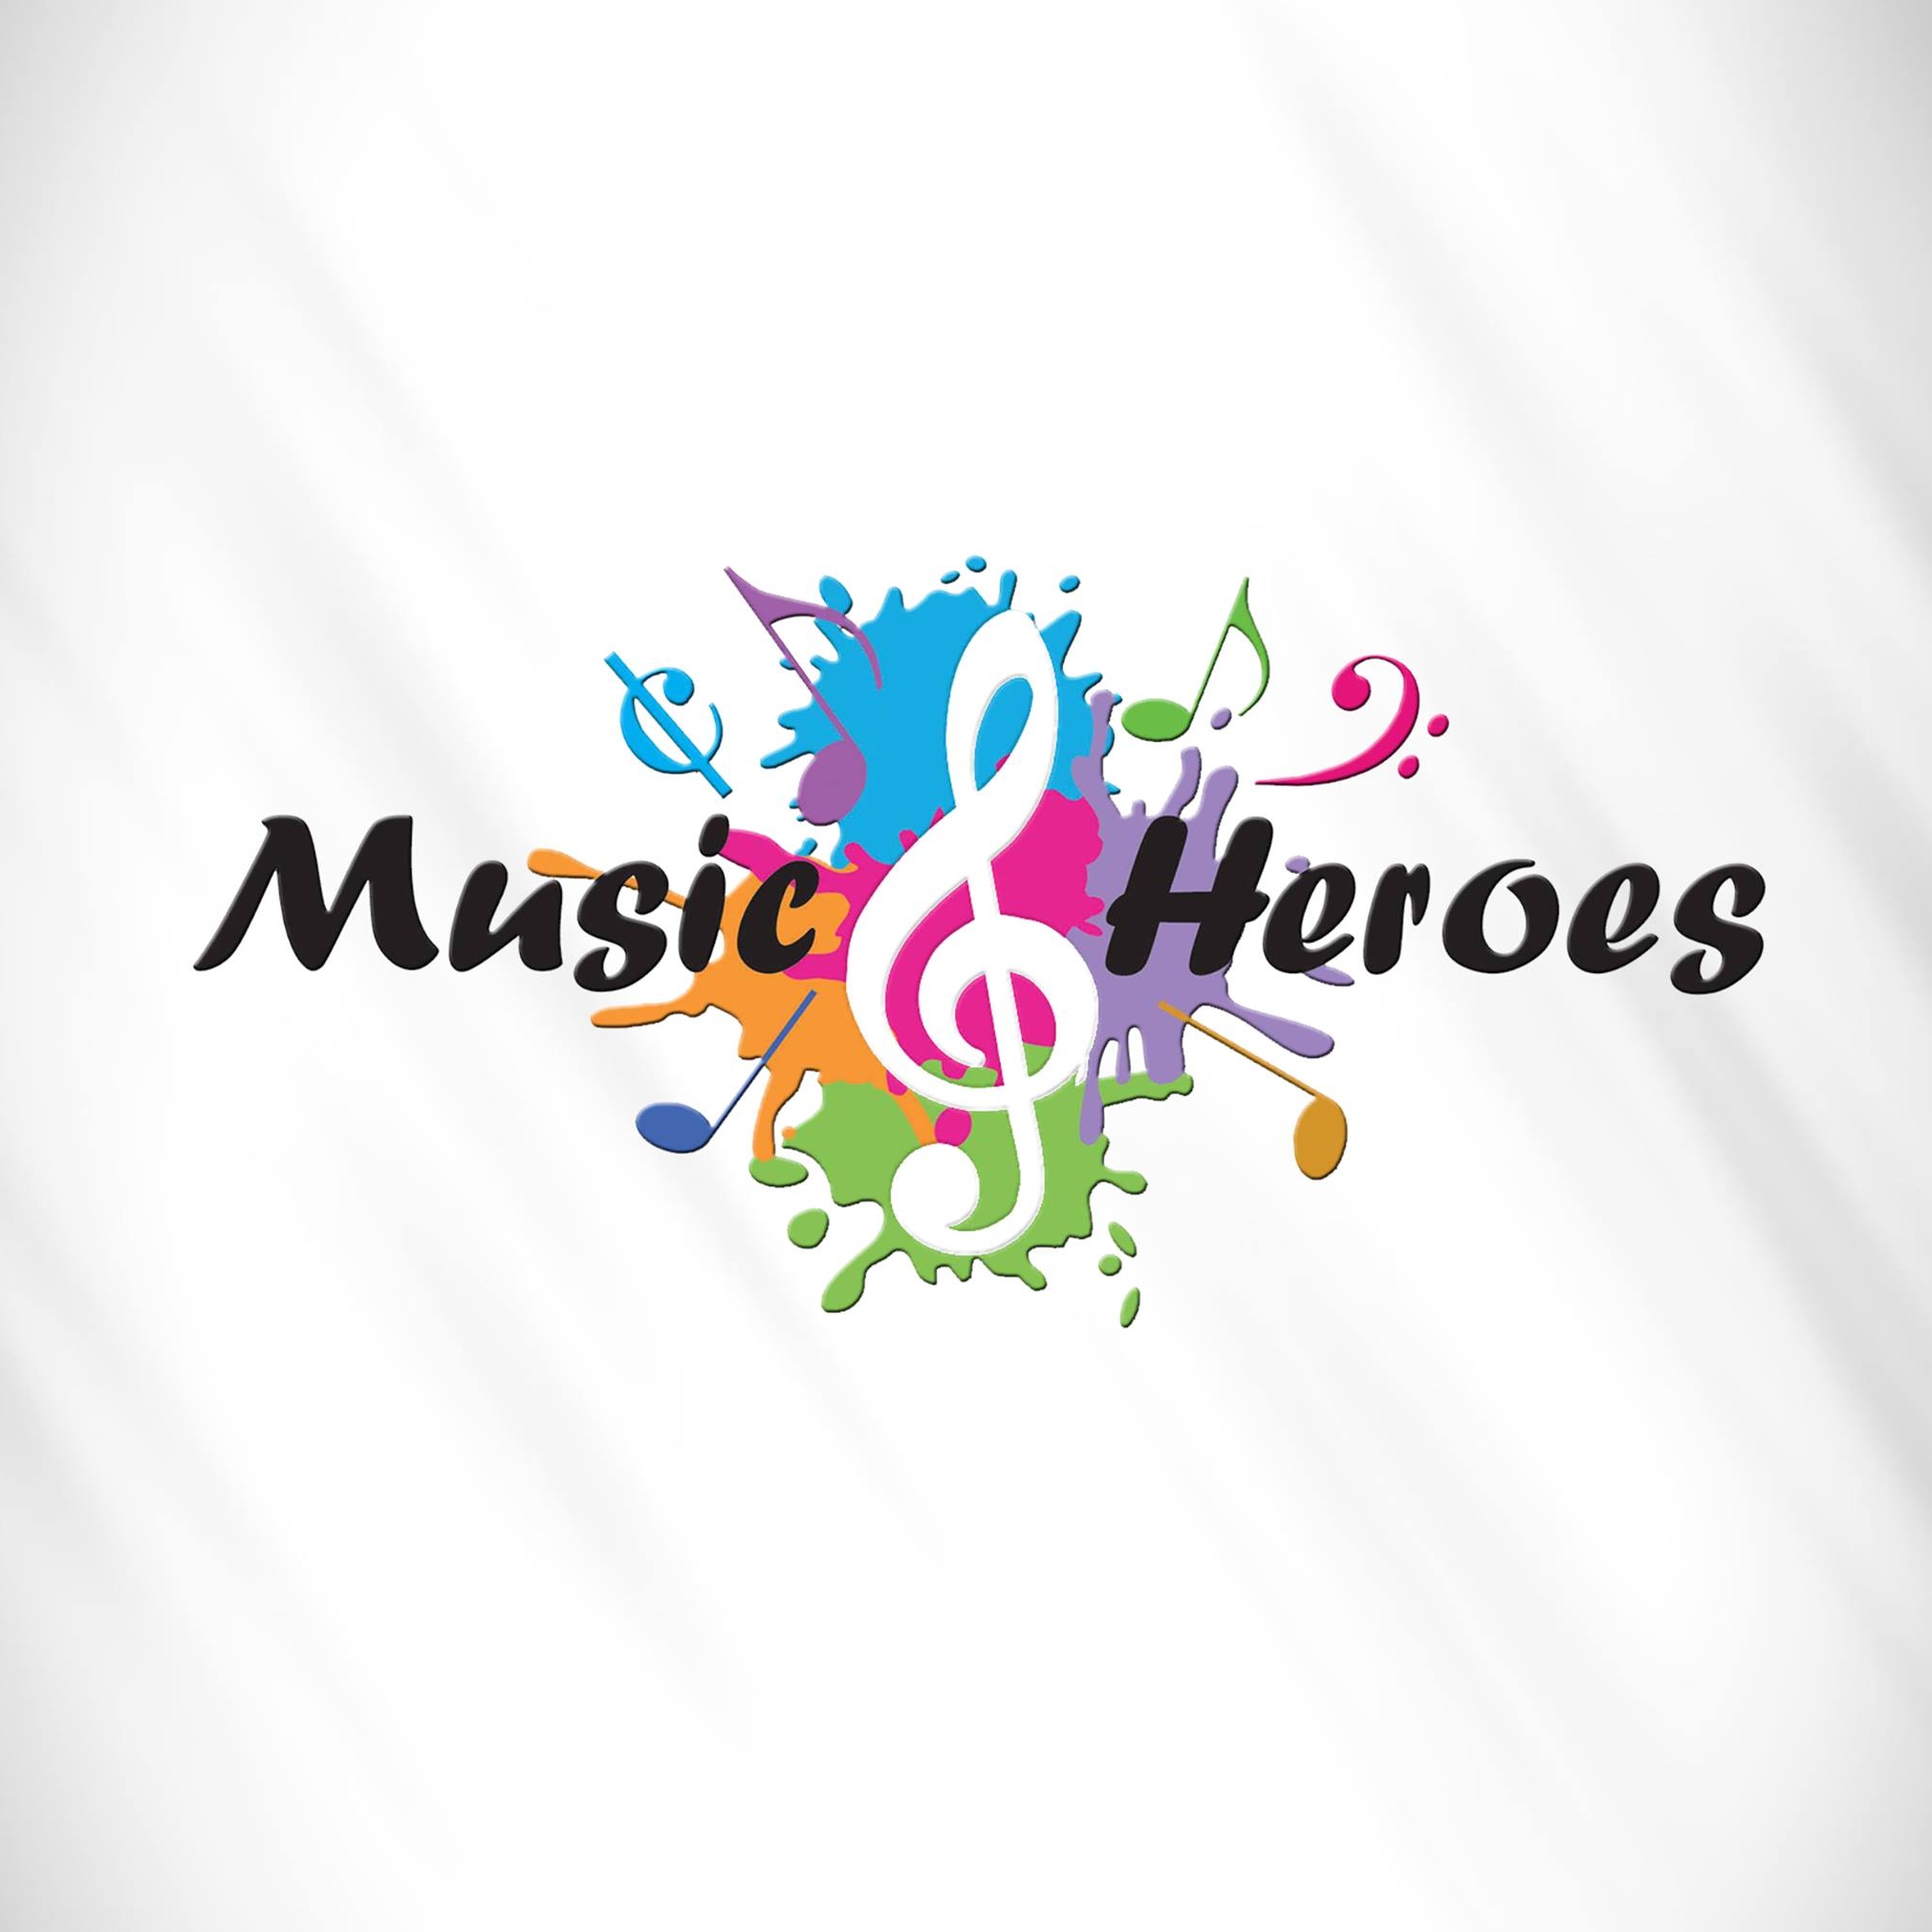 Play an instrument Image for Music Heroes Ltd